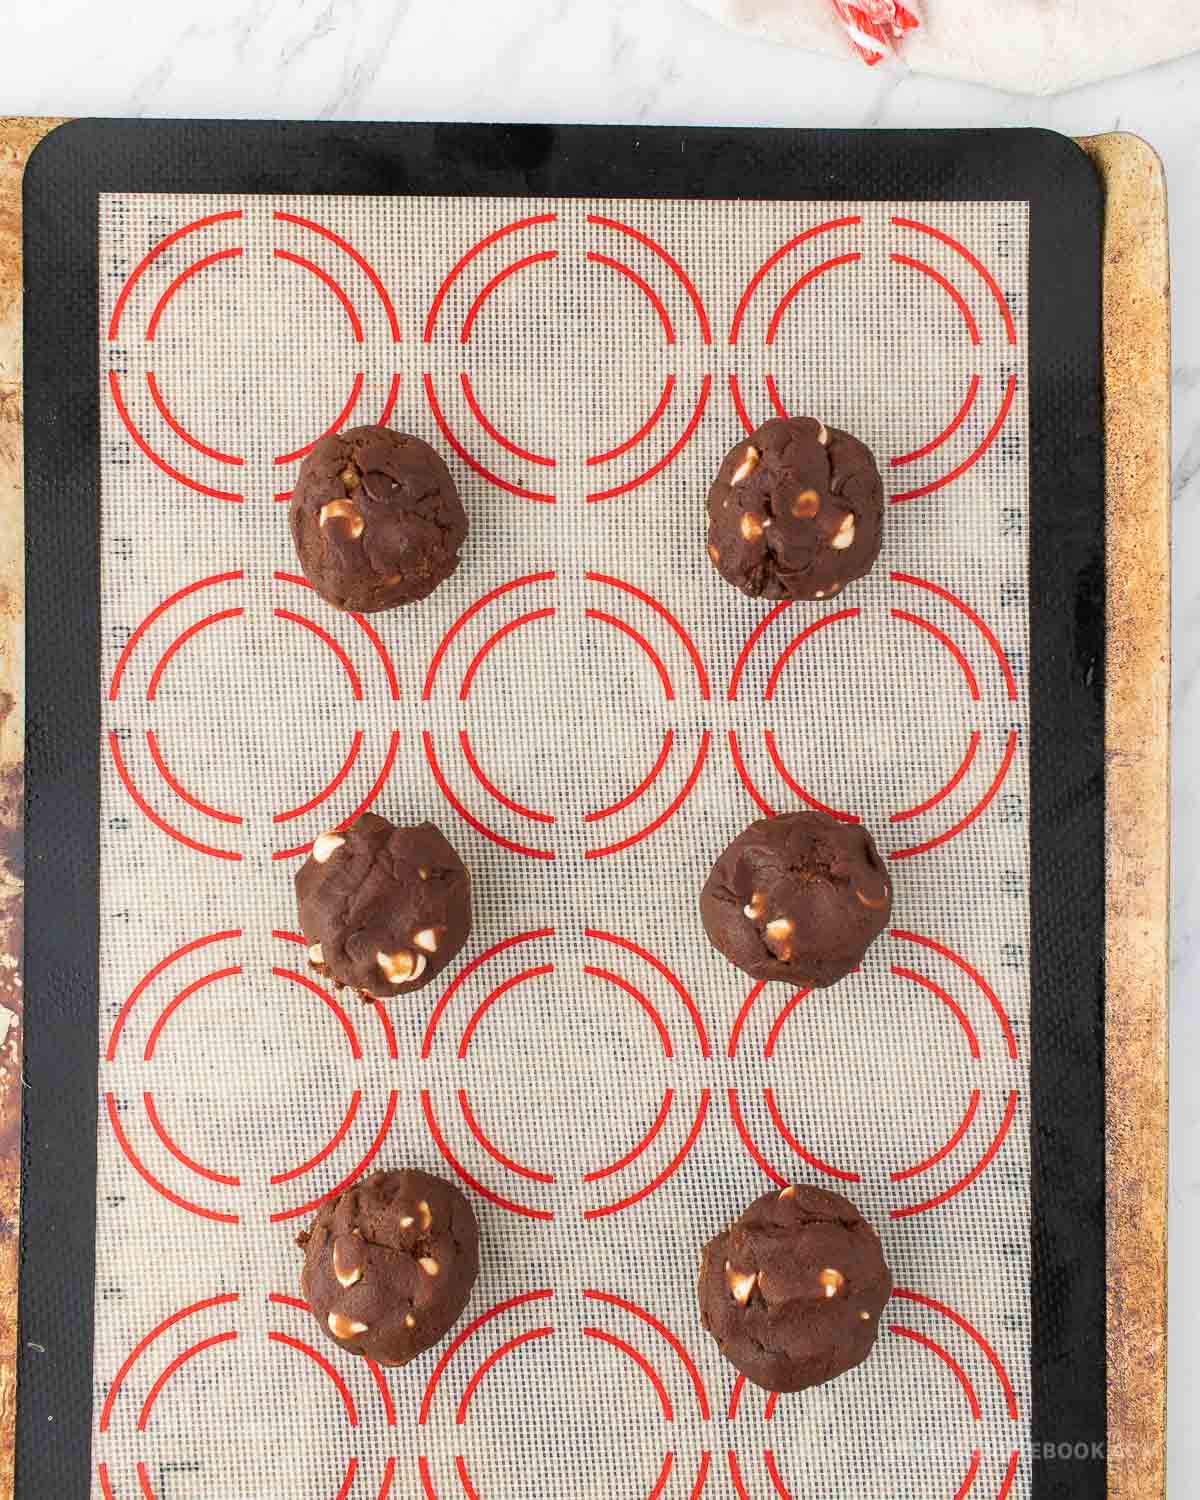 3 tablespoon size cookie dough balls rolled into a ball on a baking sheet.